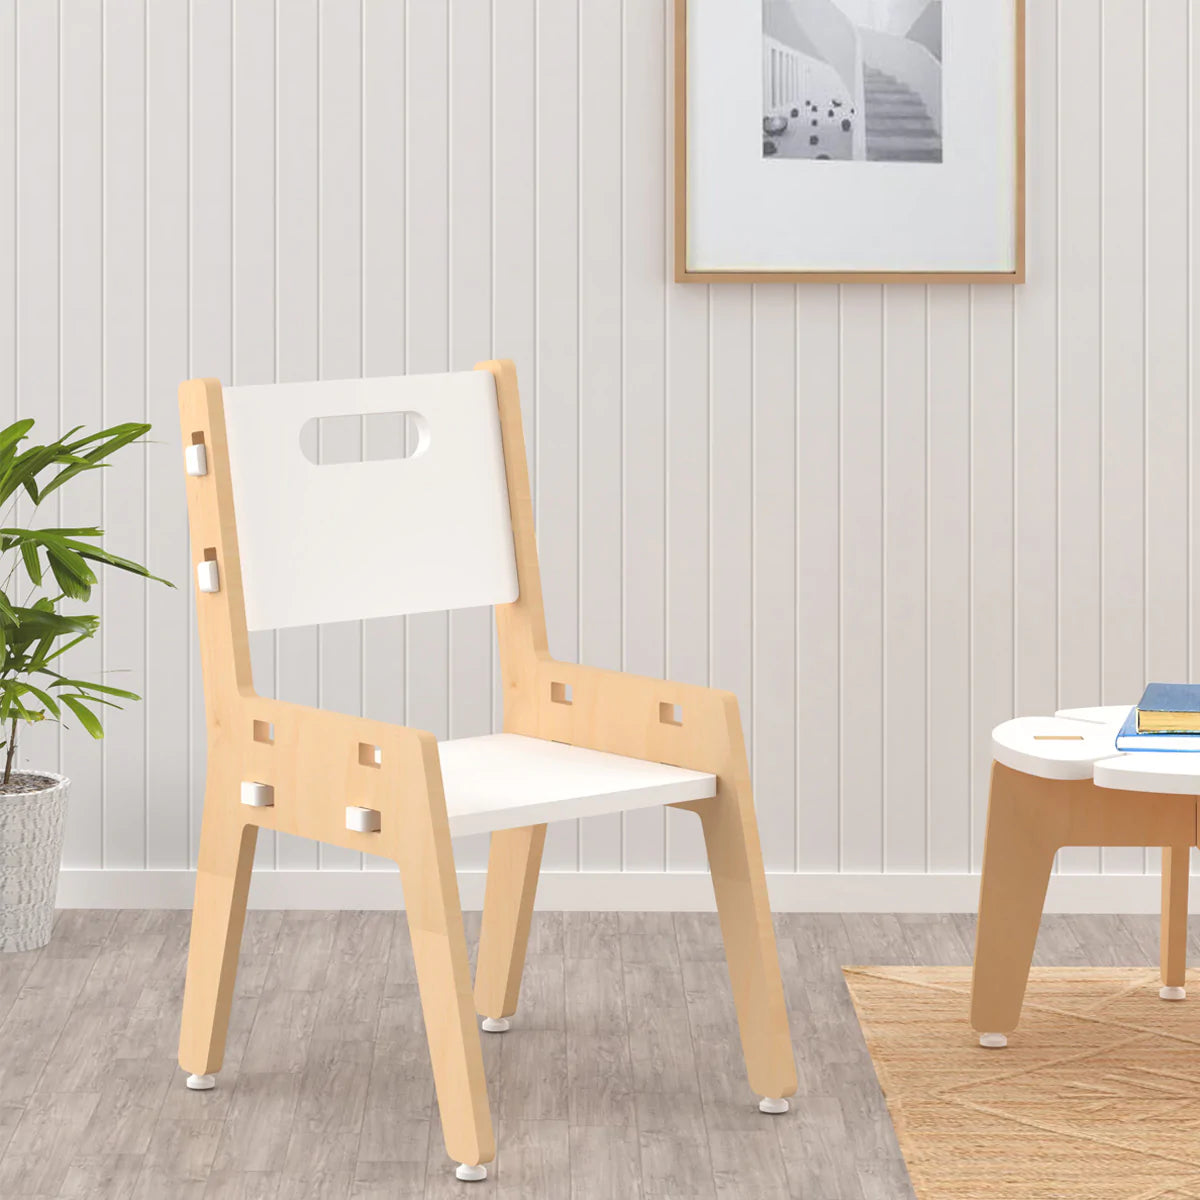 Buy Silver Peach Wooden Chair - White - Learning Furniture - SkilloToys.com